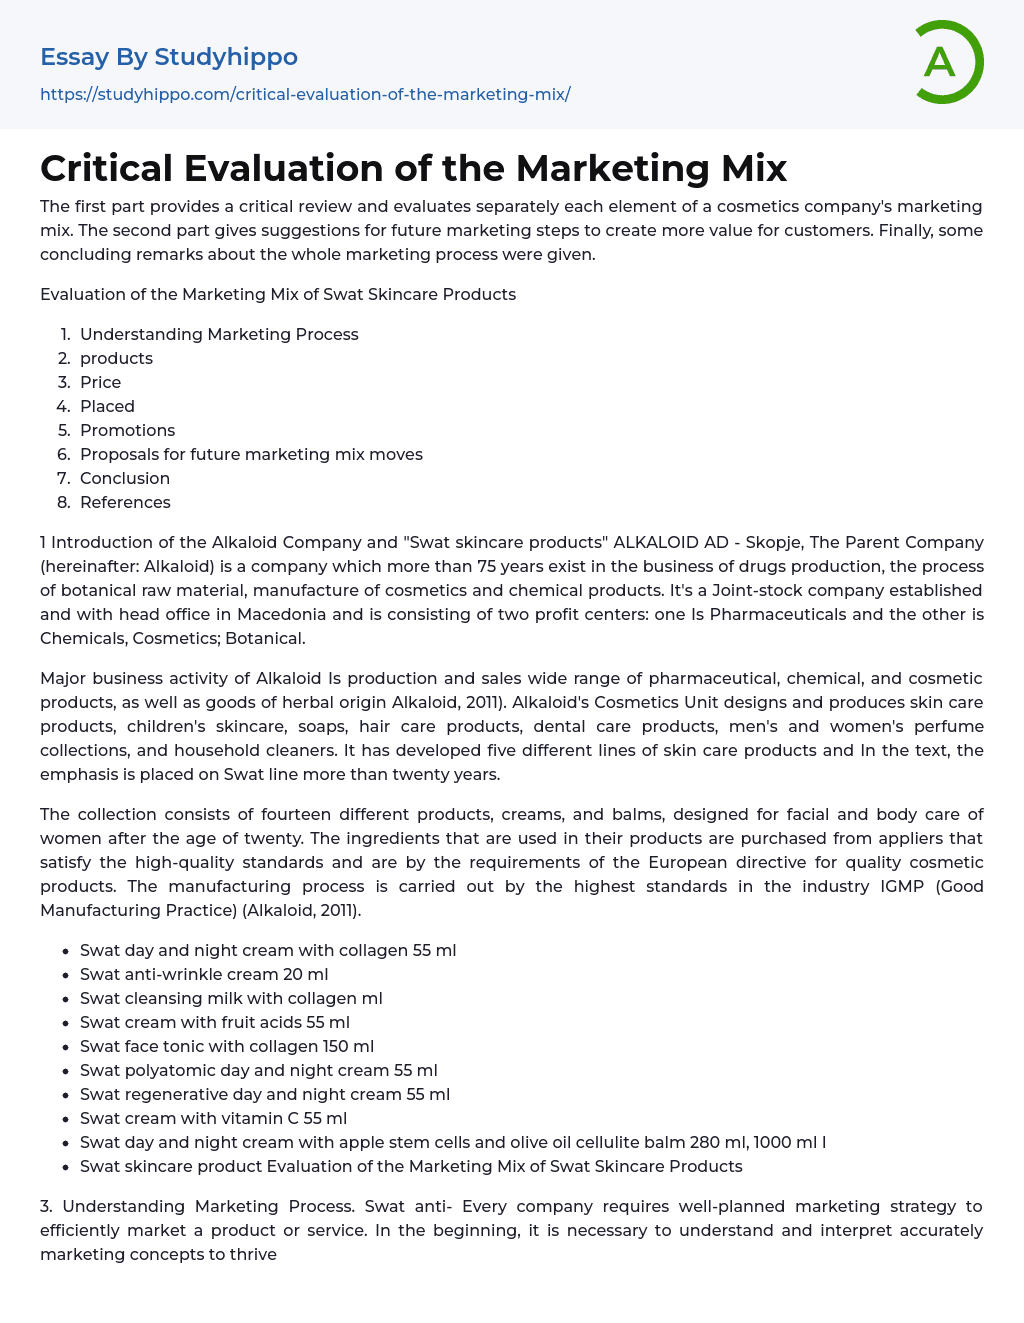 Critical Evaluation of the Marketing Mix Essay Example